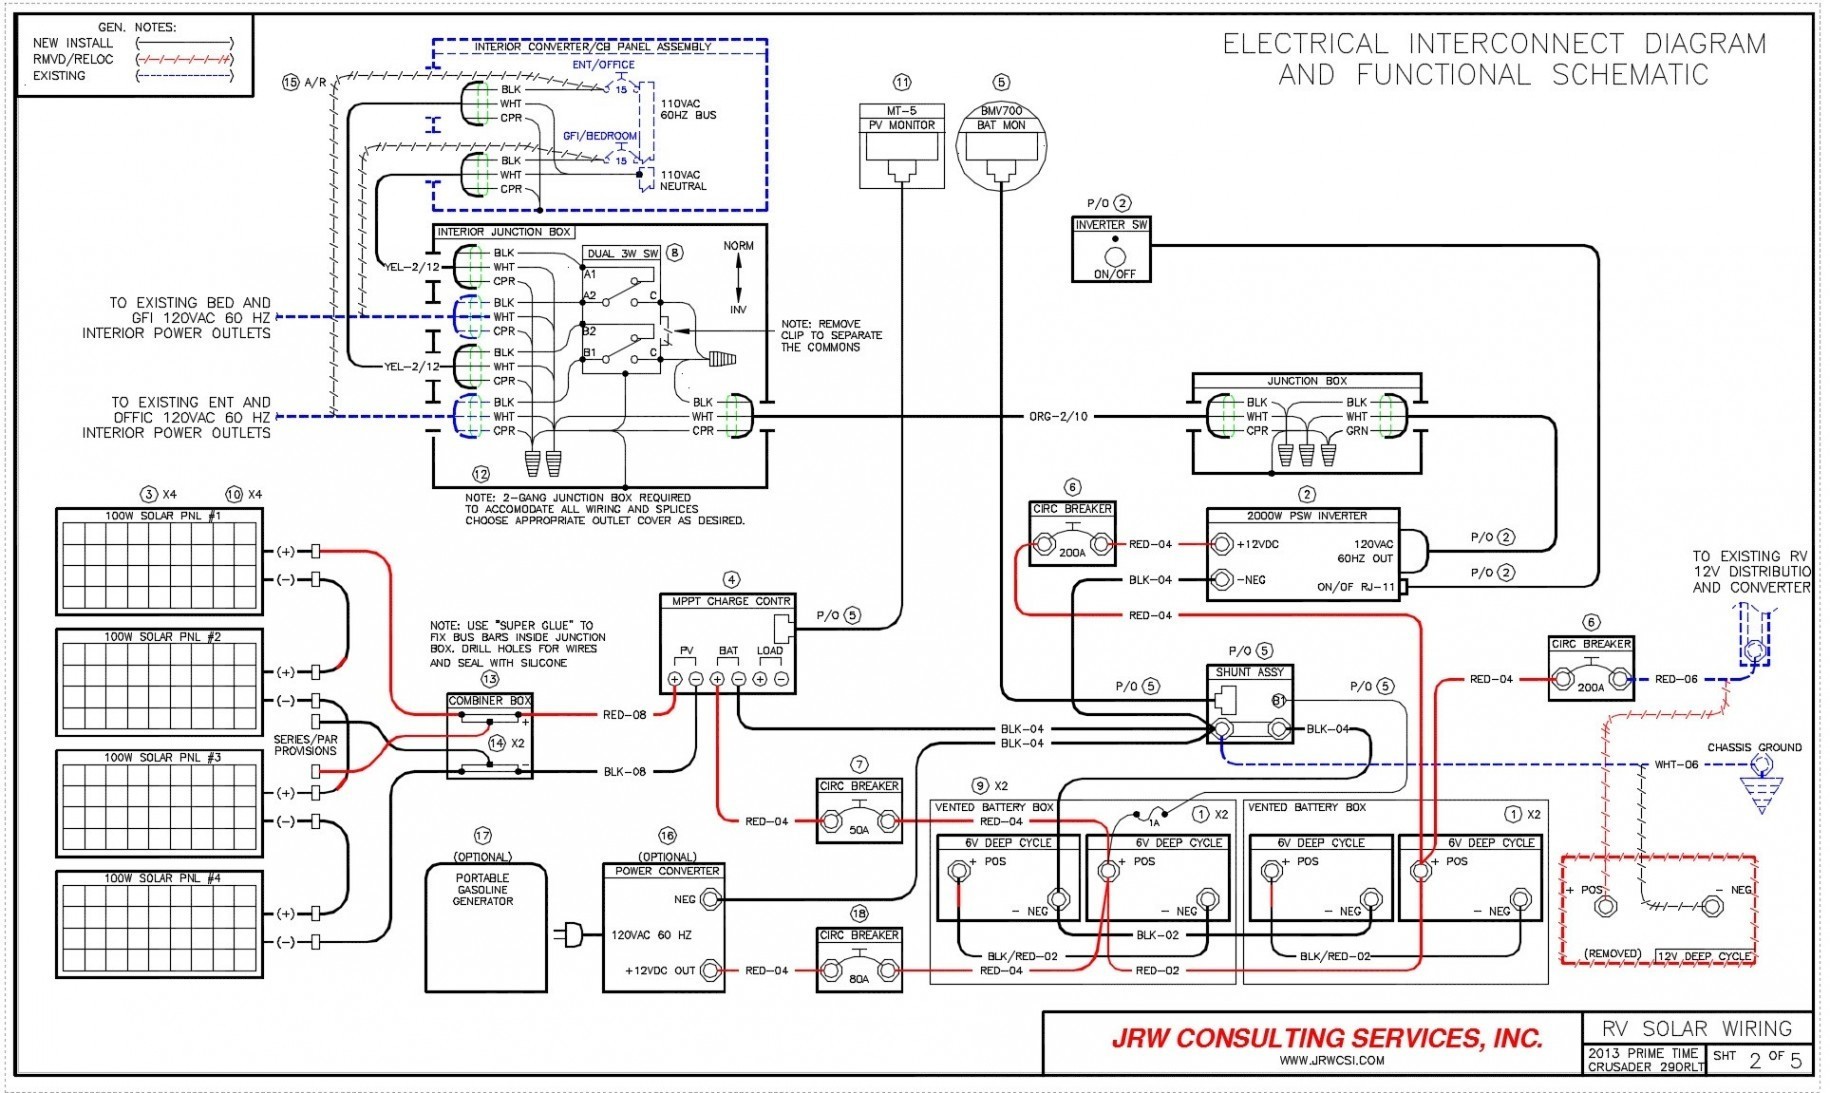 Wiring Diagram for Car Stereo Light Switch Wiring Diagram Inspirational Diagram Website Light Rx Of Wiring Diagram for Car Stereo